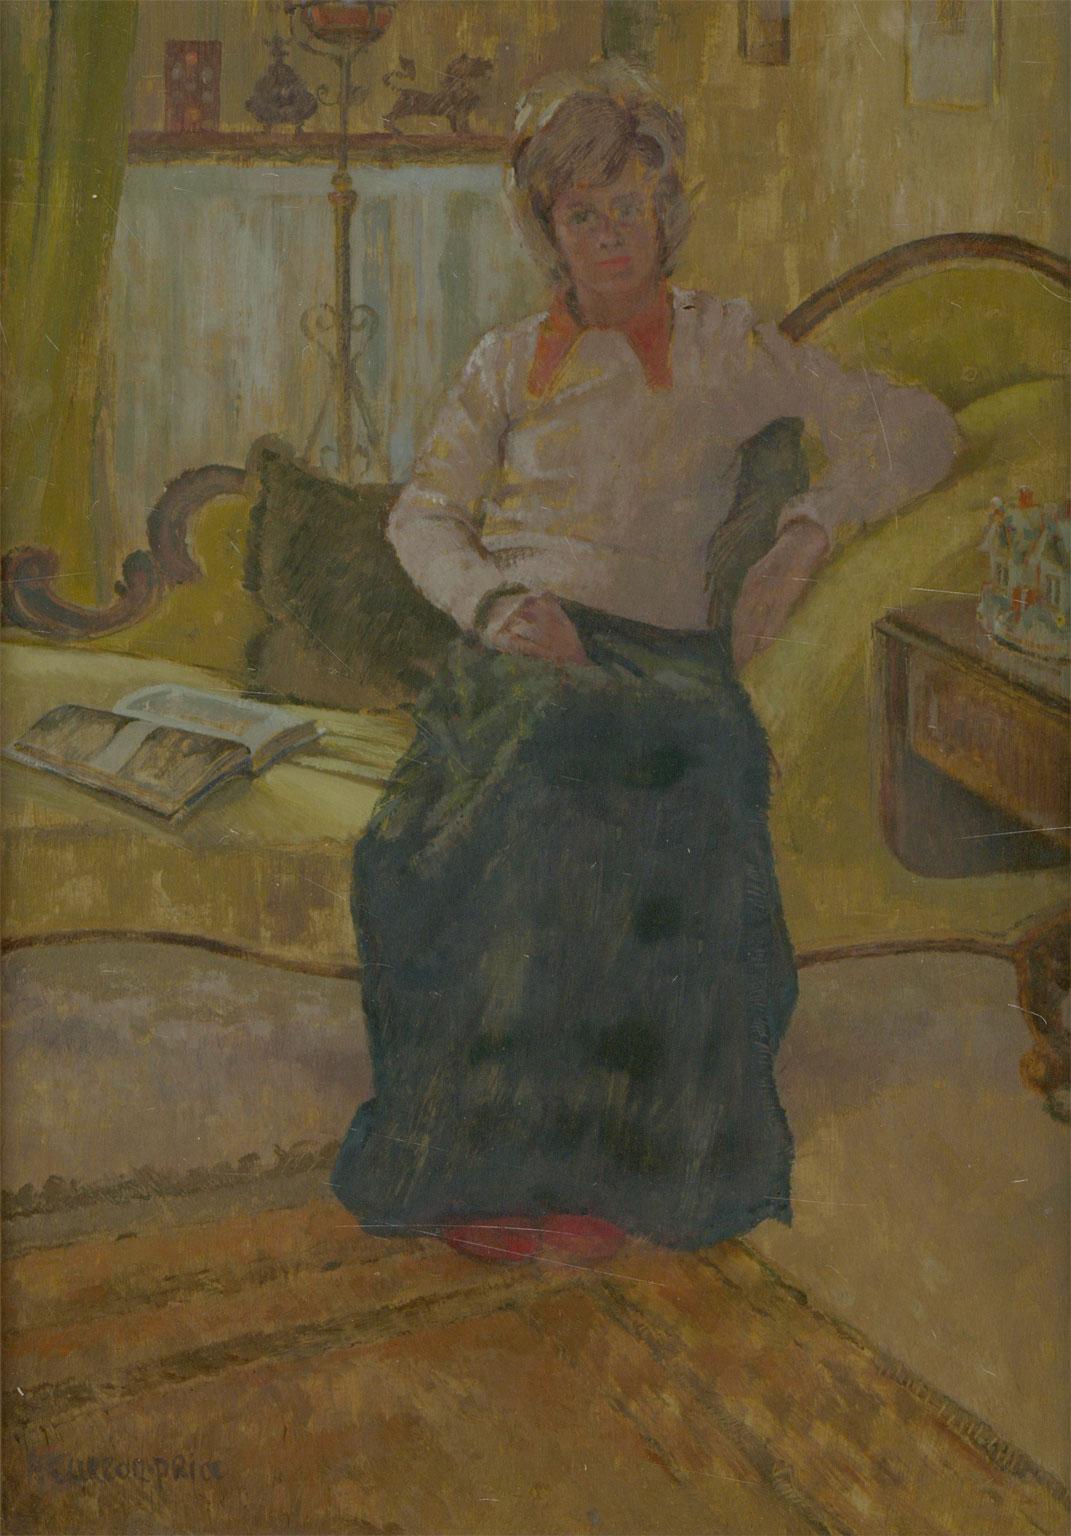 An impressive pair of 20th century British oil paintings showing two seated women by Art Workers Guild member Paddy Curzon-Price. The comfortability with which both women are positioned in their domestic settings shows Curzon-Price's ability to make